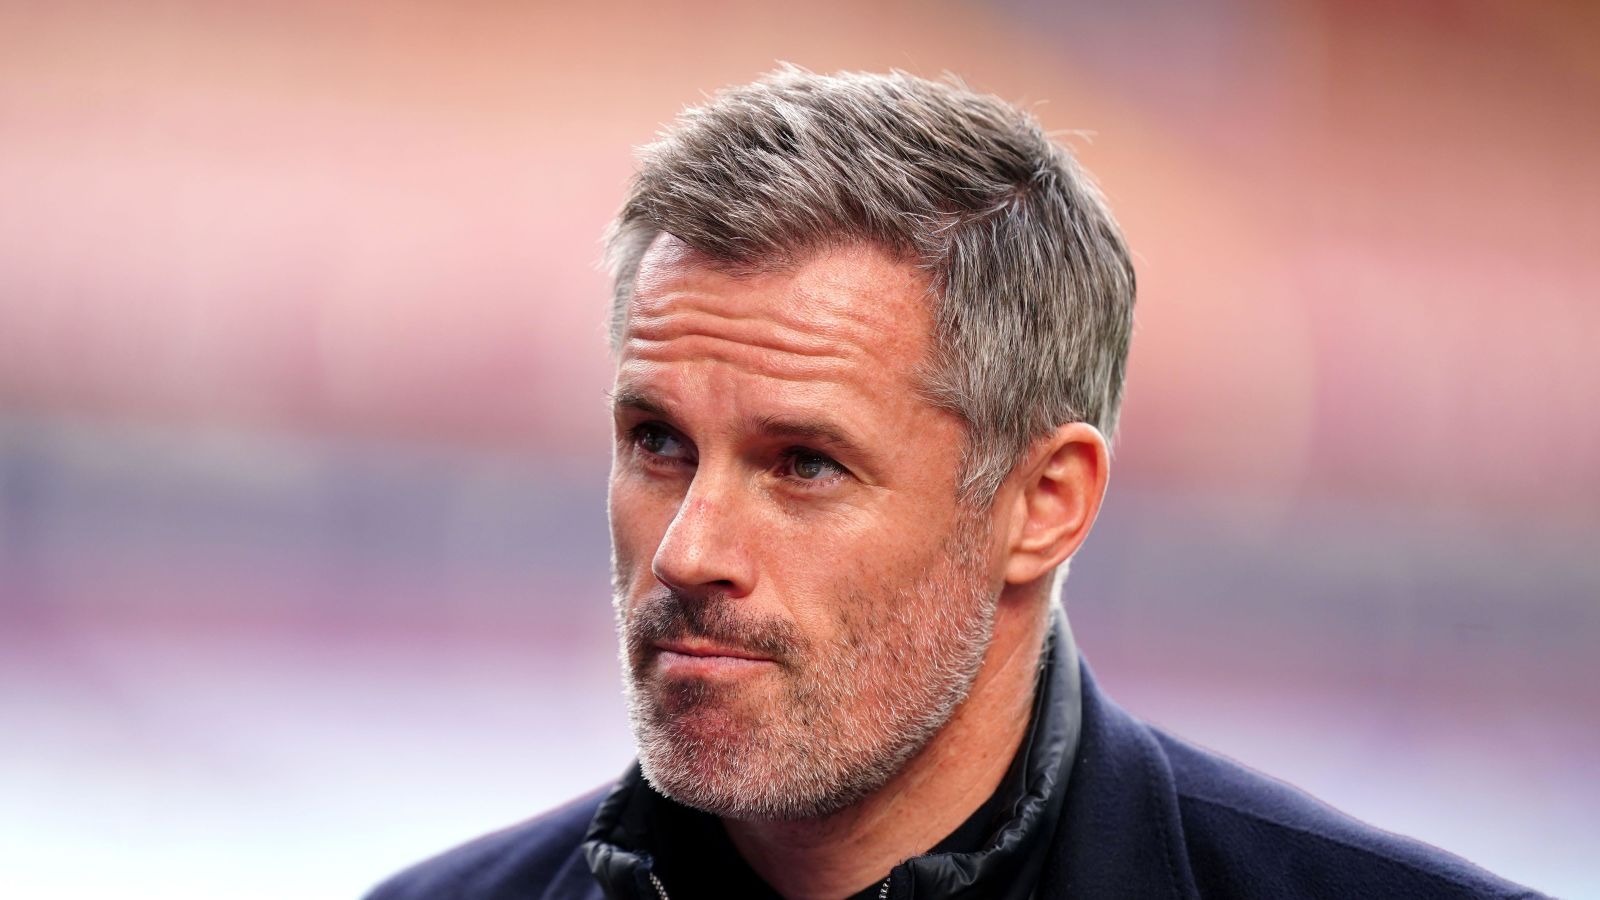 EPL: Carragher responds to criticism from Ten Hag over Man United